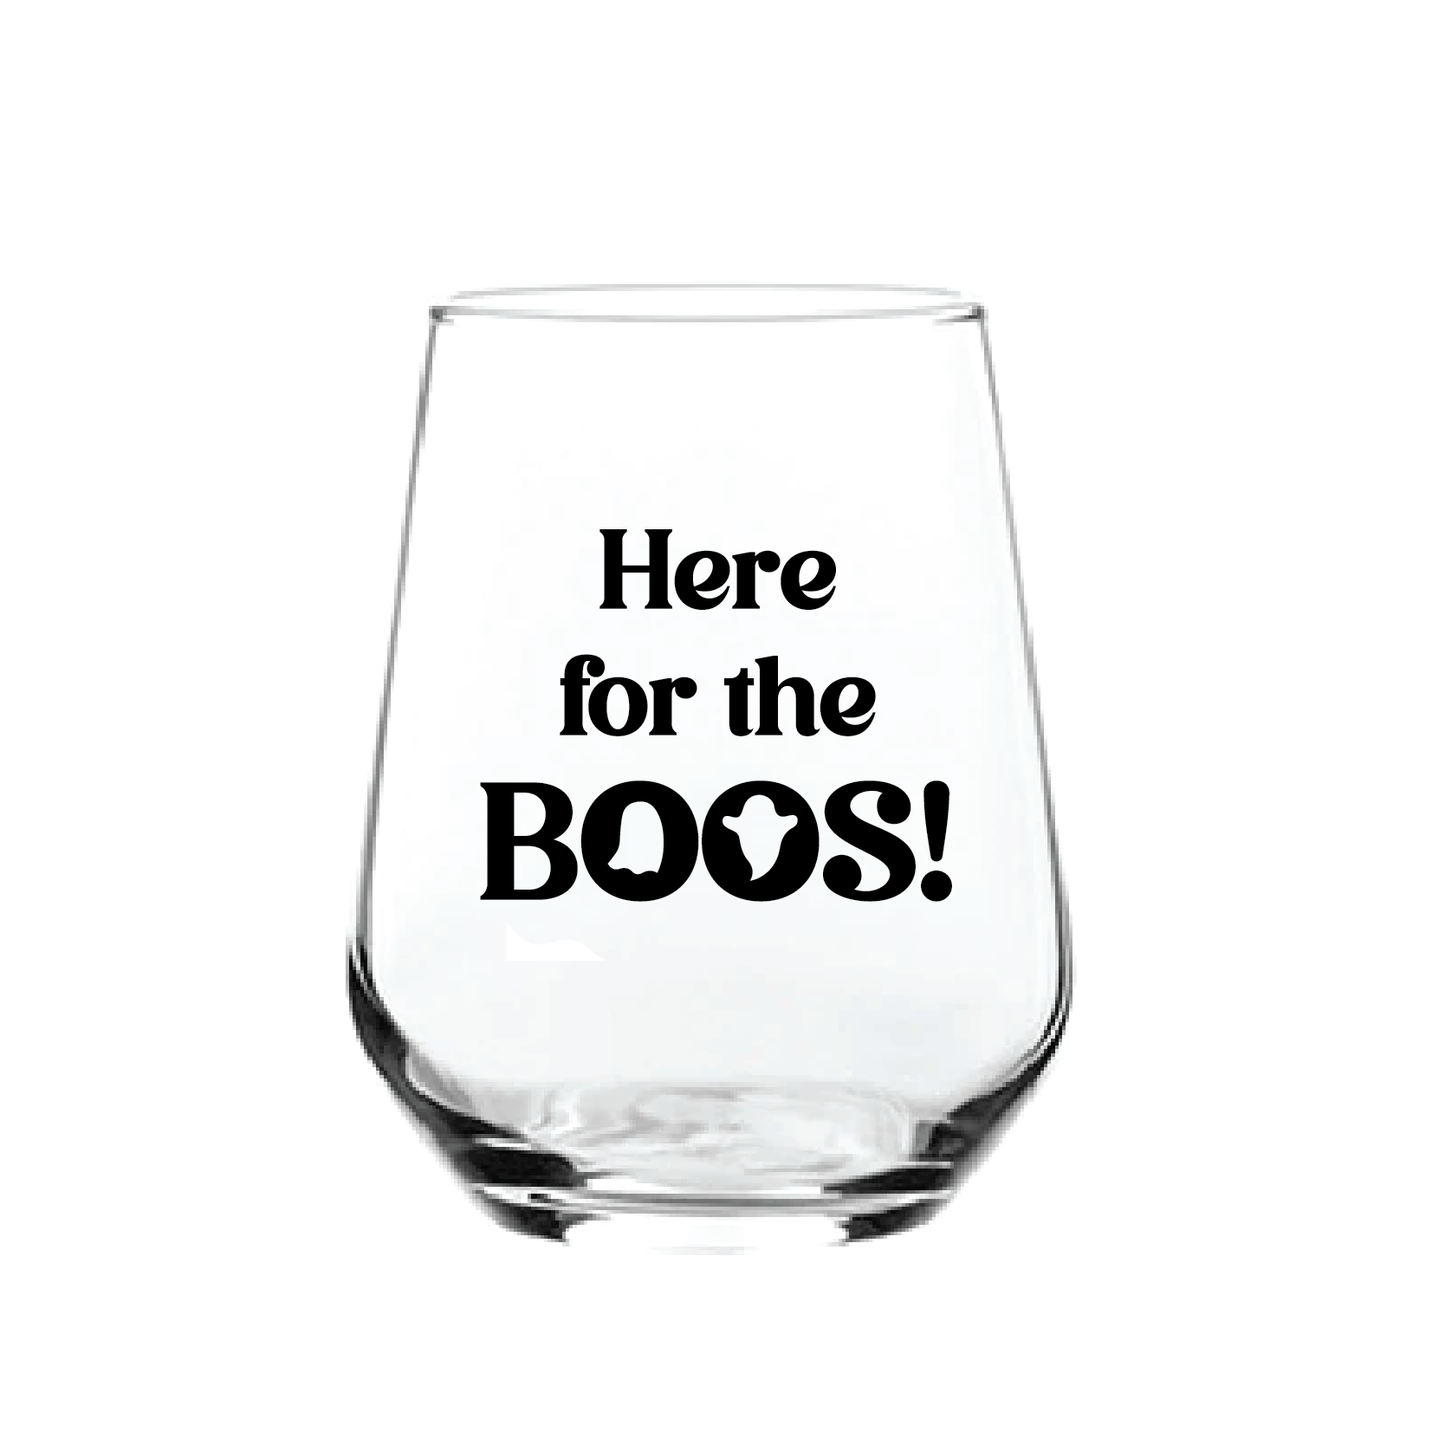 Halloween 14.25oz Allegra Stemless Wine Glass - Here for the Boos